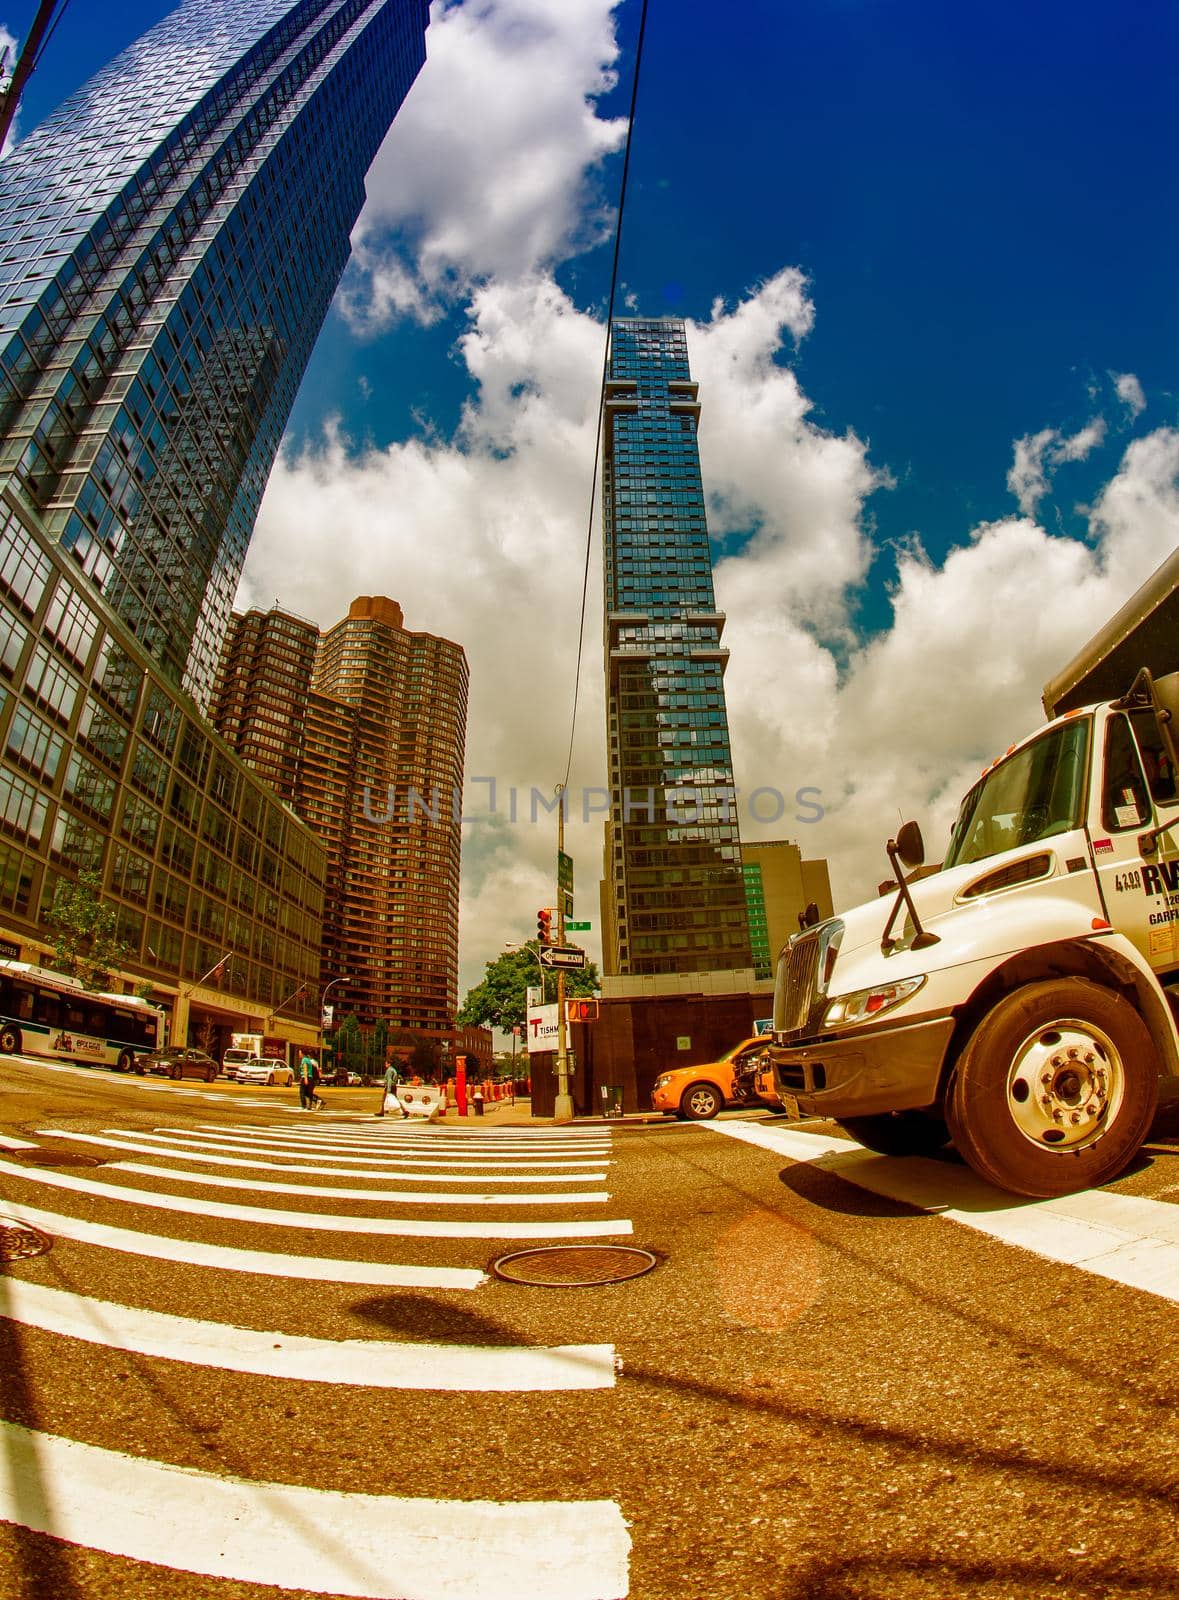 NEW YORK CITY - JUNE 11, 2013: Manhattan traffic on a hot sunny day by jovannig